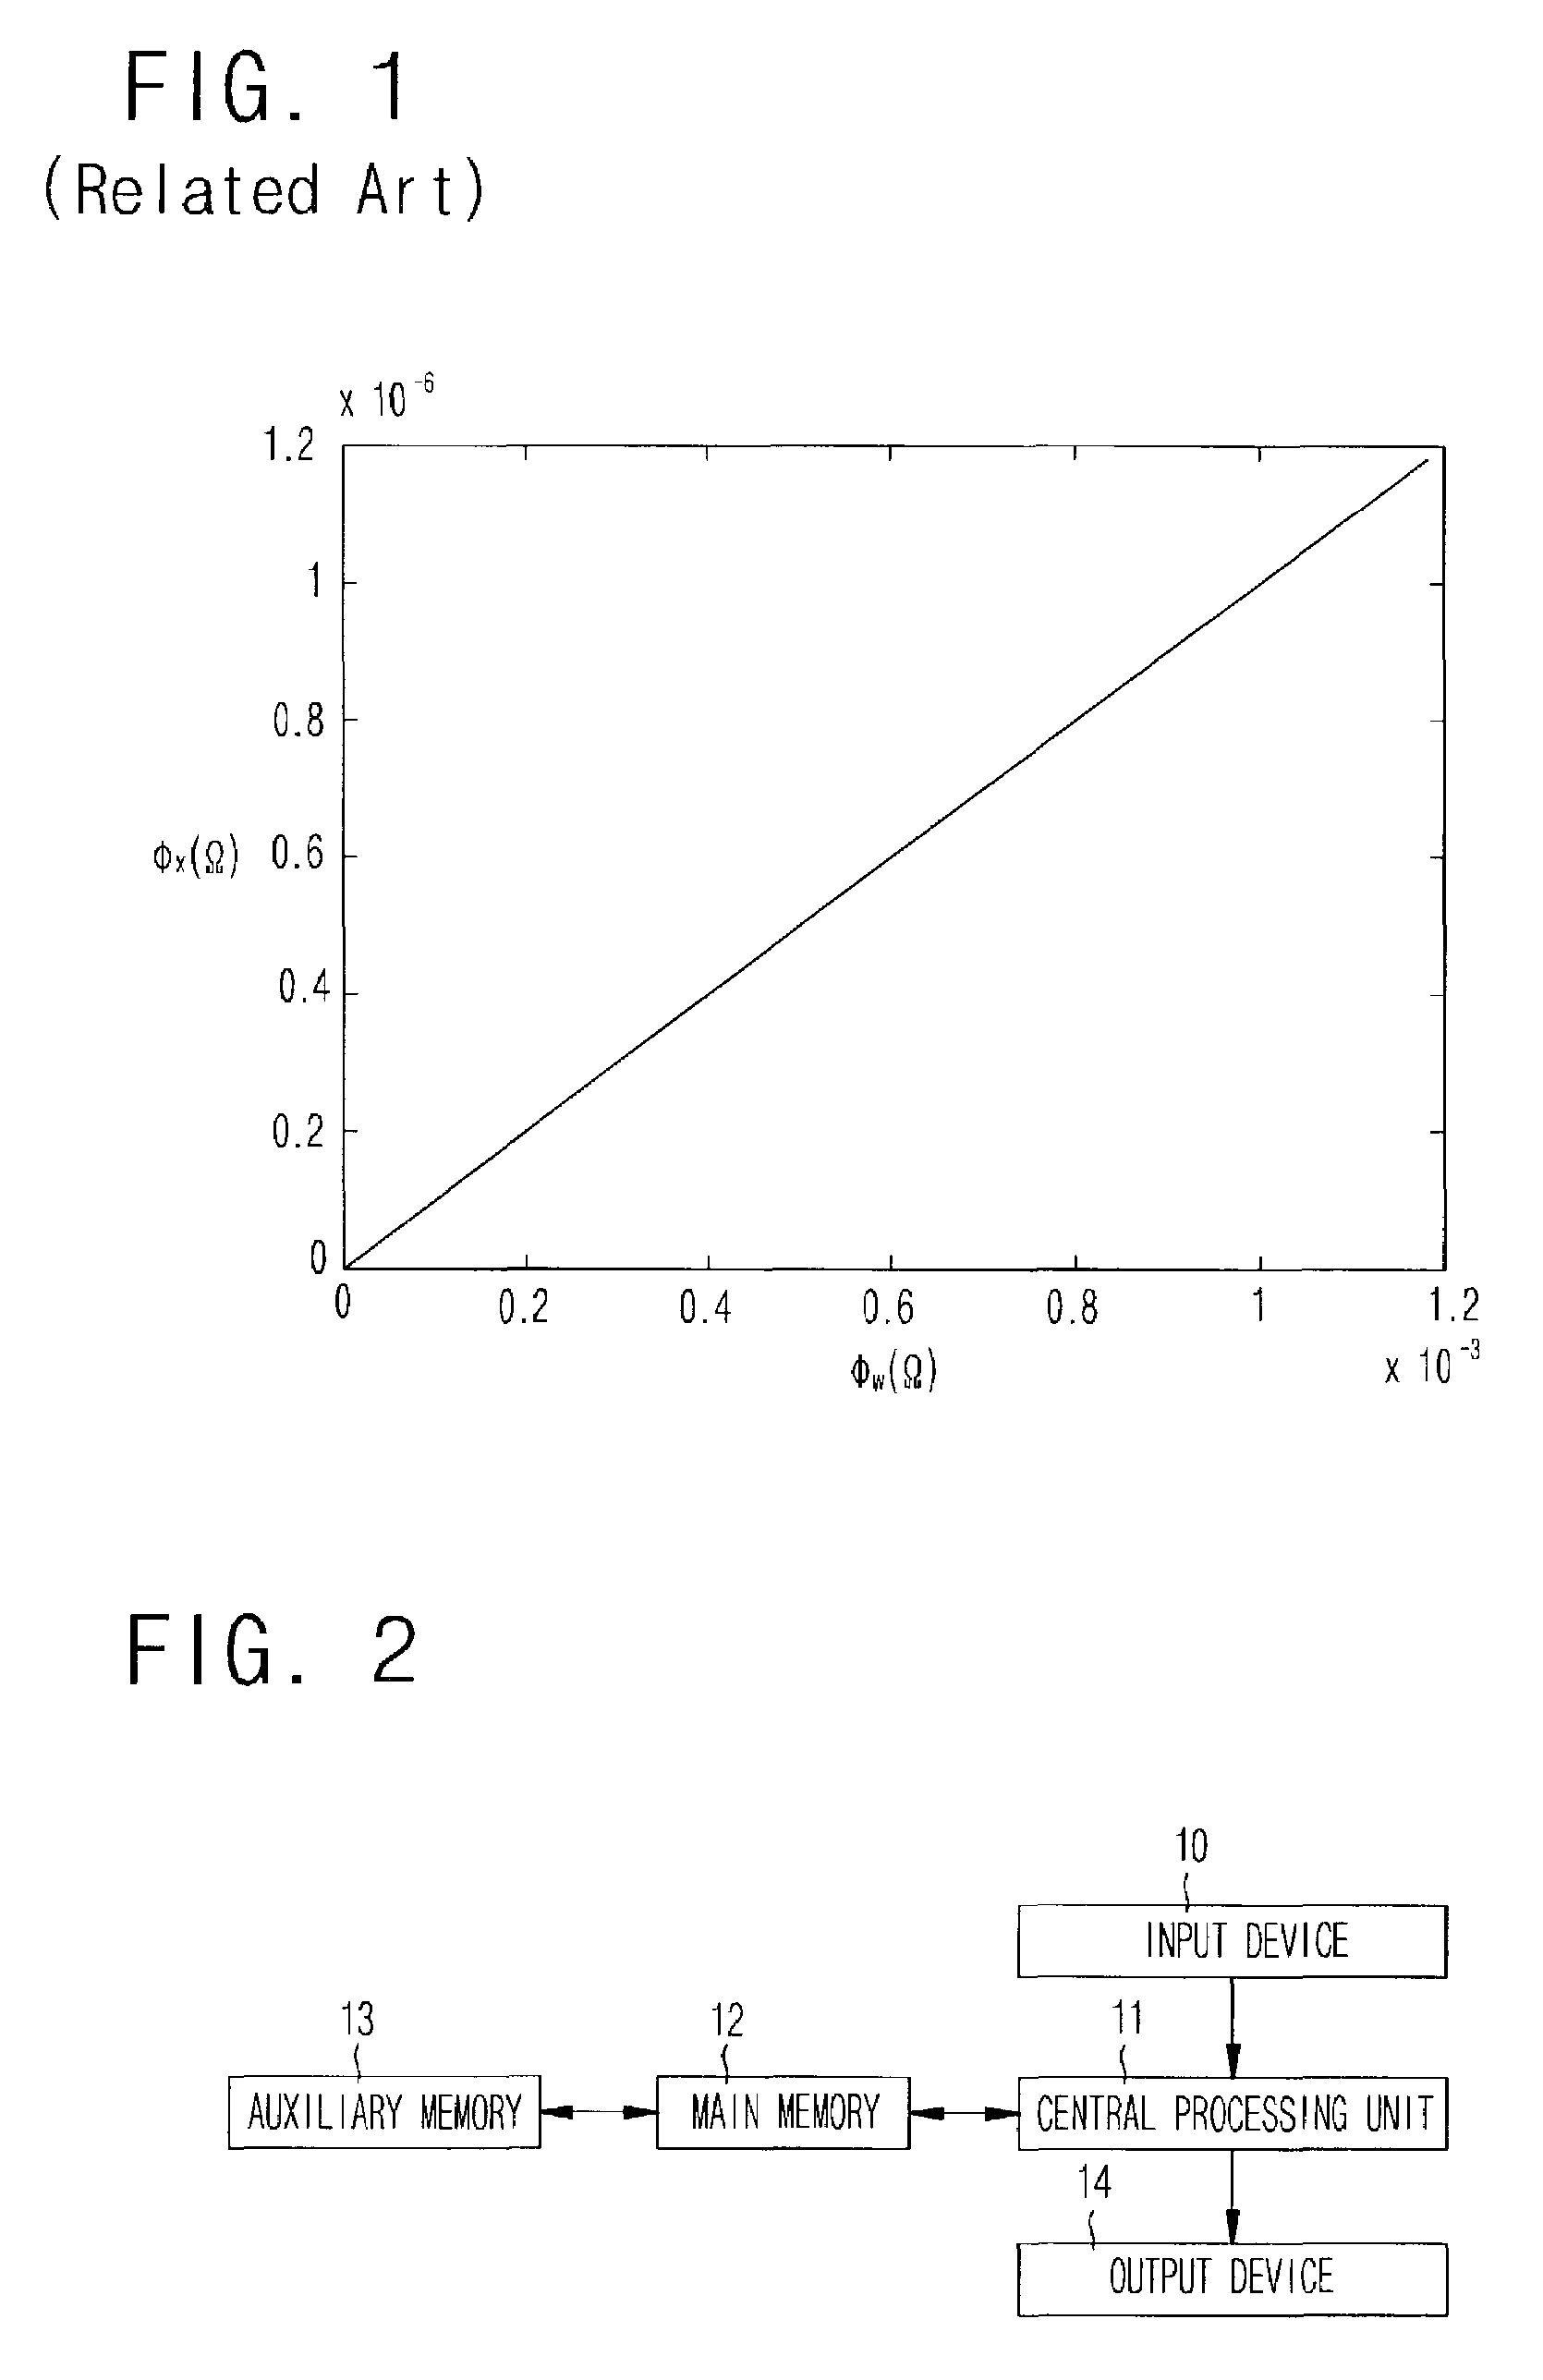 Method of designing watermark in consideration of wiener attack and whitening filtered detection